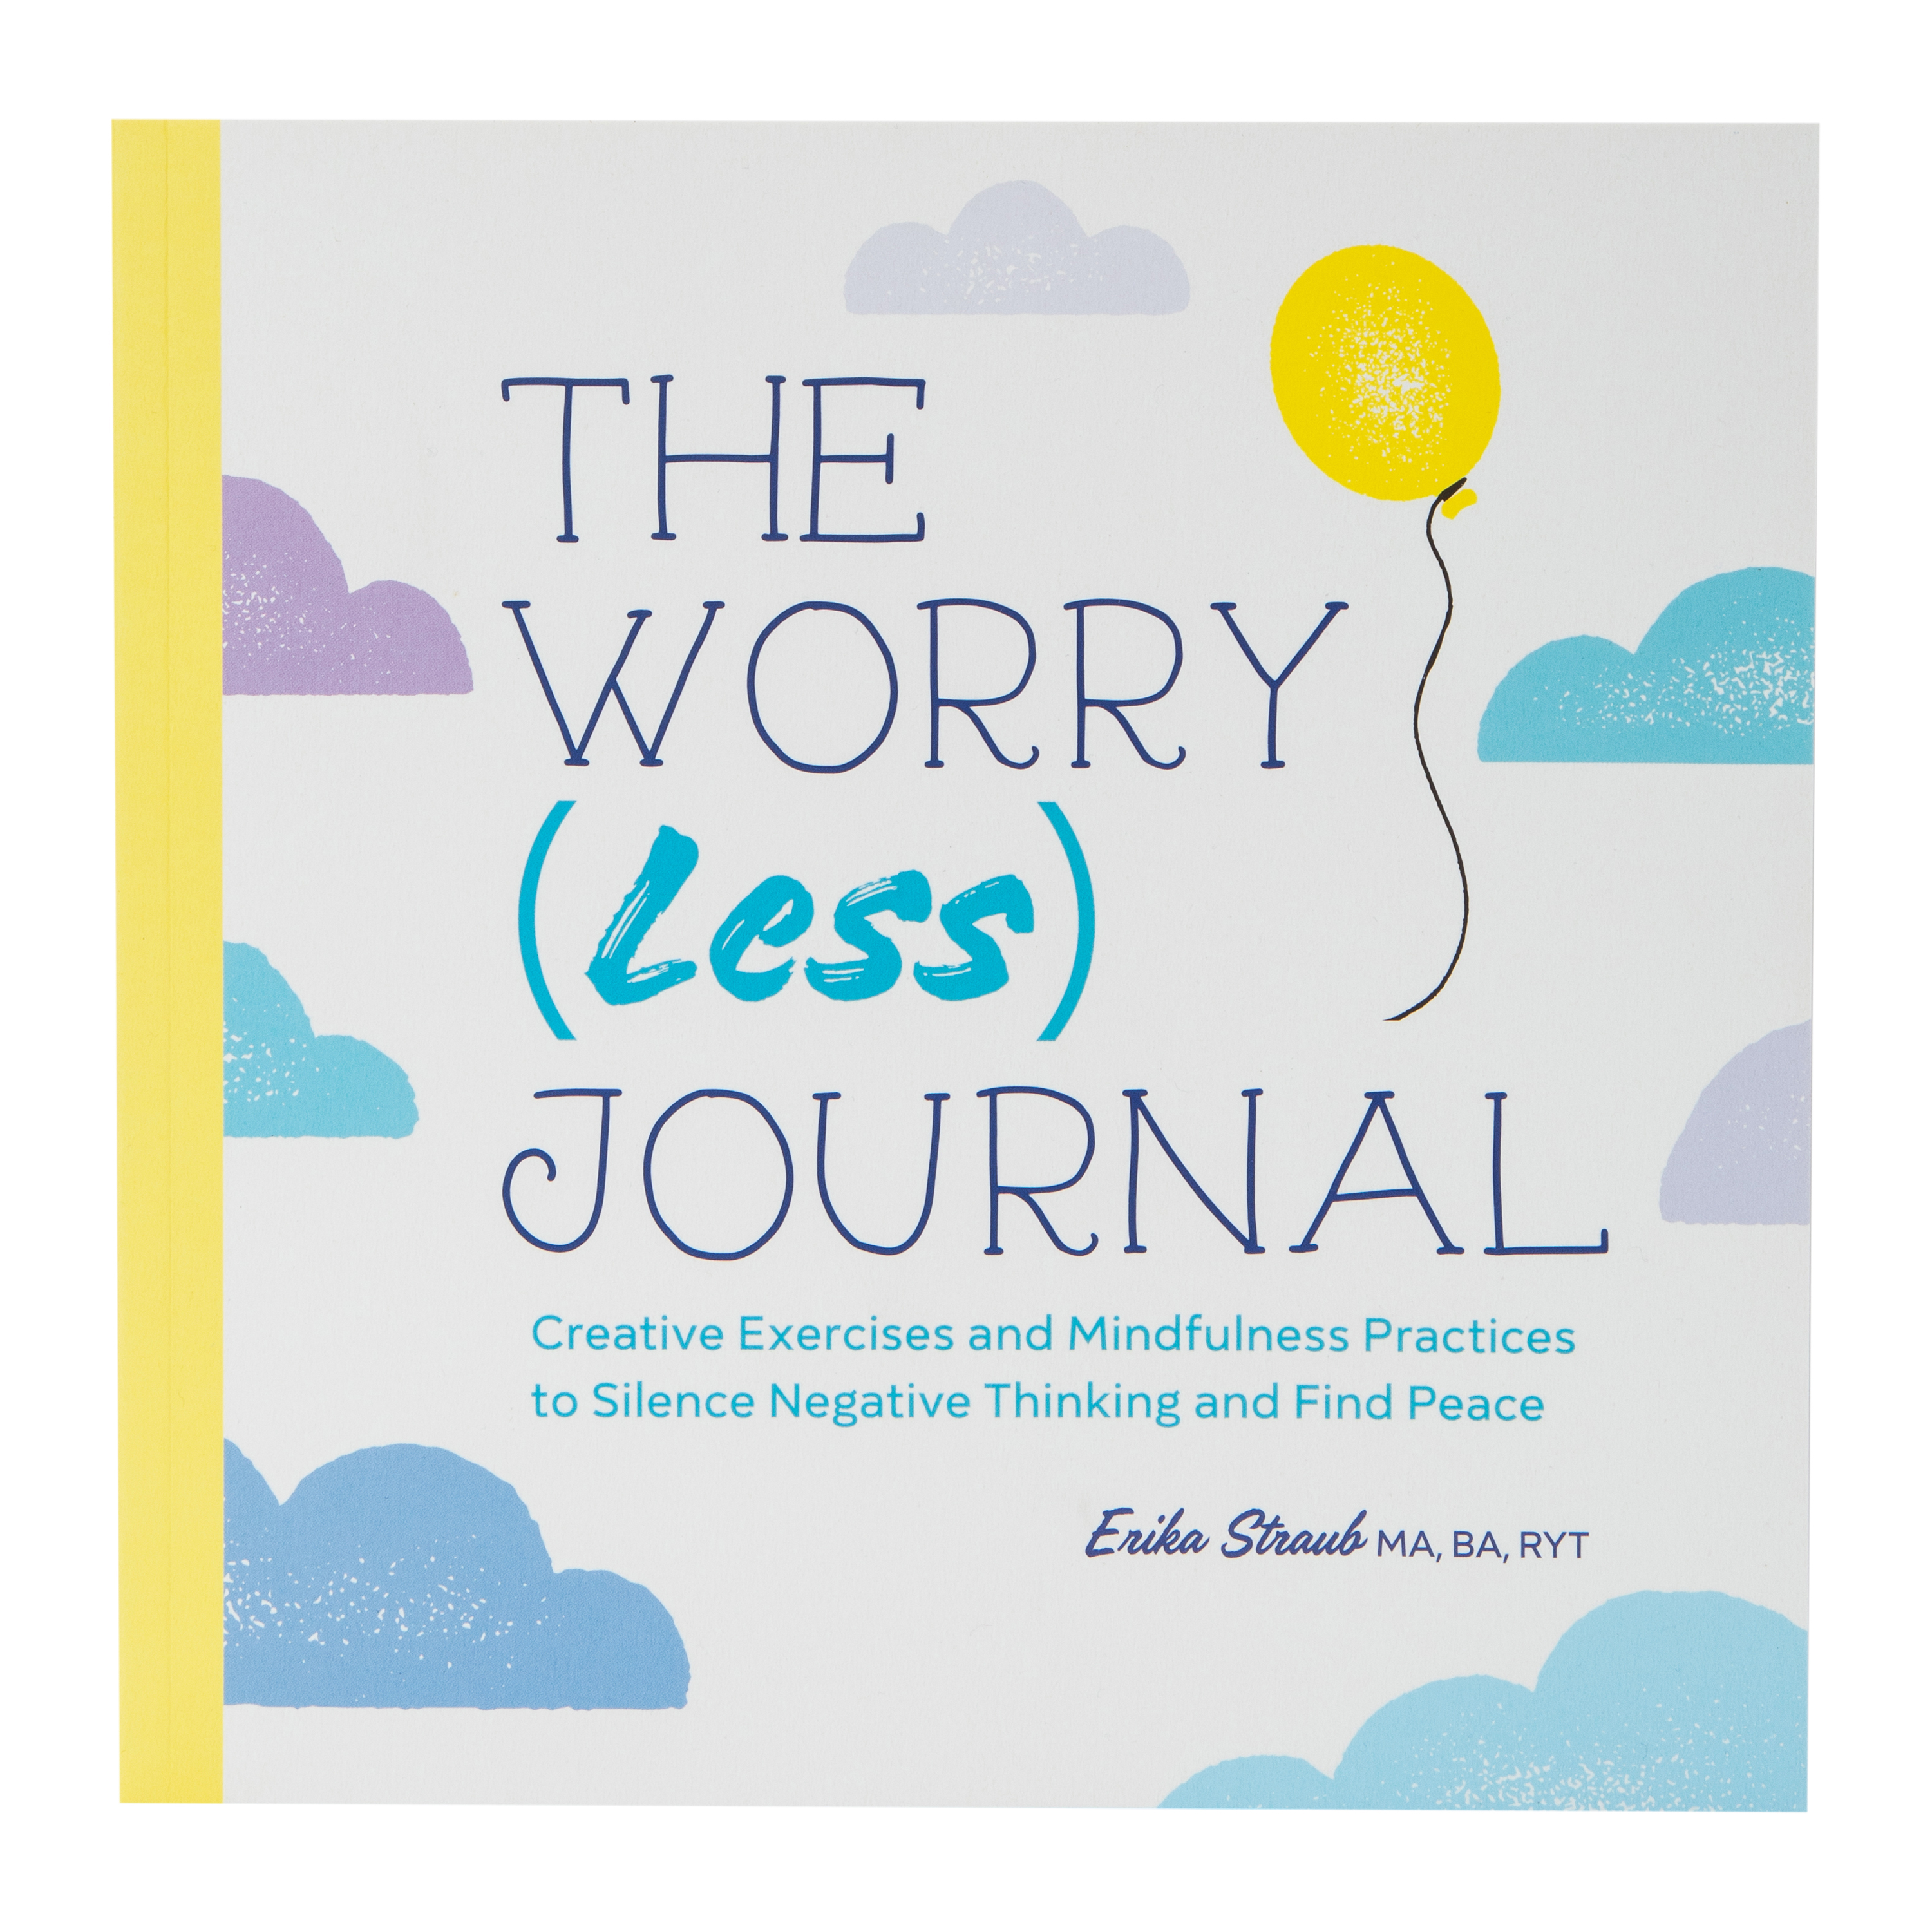 The Worry (Less) Journal by Erika Straub